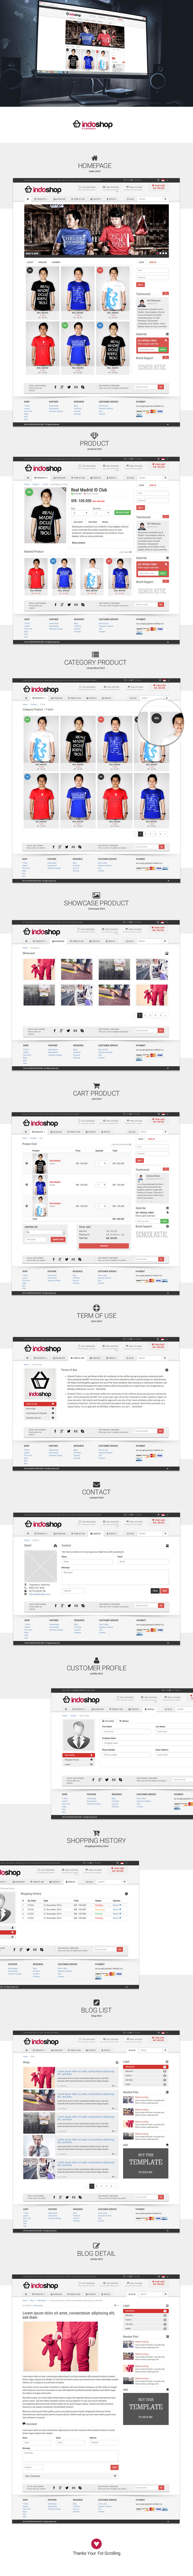 Ecommerce Web UI ux template Onlineshop design indeveloper html5 css3 modern clean pure tshirt store